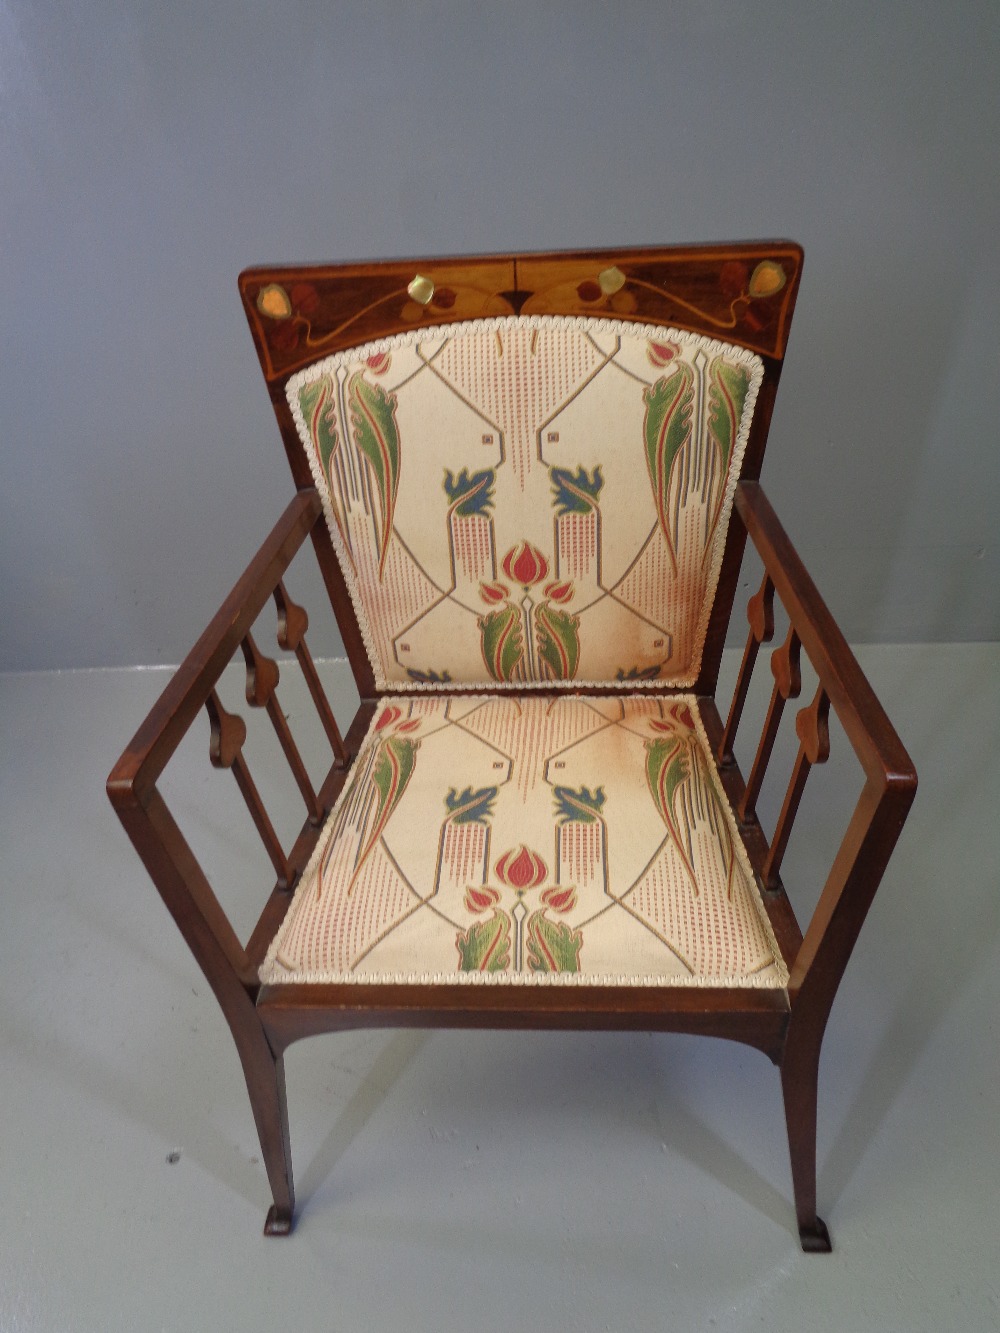 ARTS & CRAFTS MAHOGANY ELBOW CHAIR, mother of pearl inlaid uprights with Mackintosh style